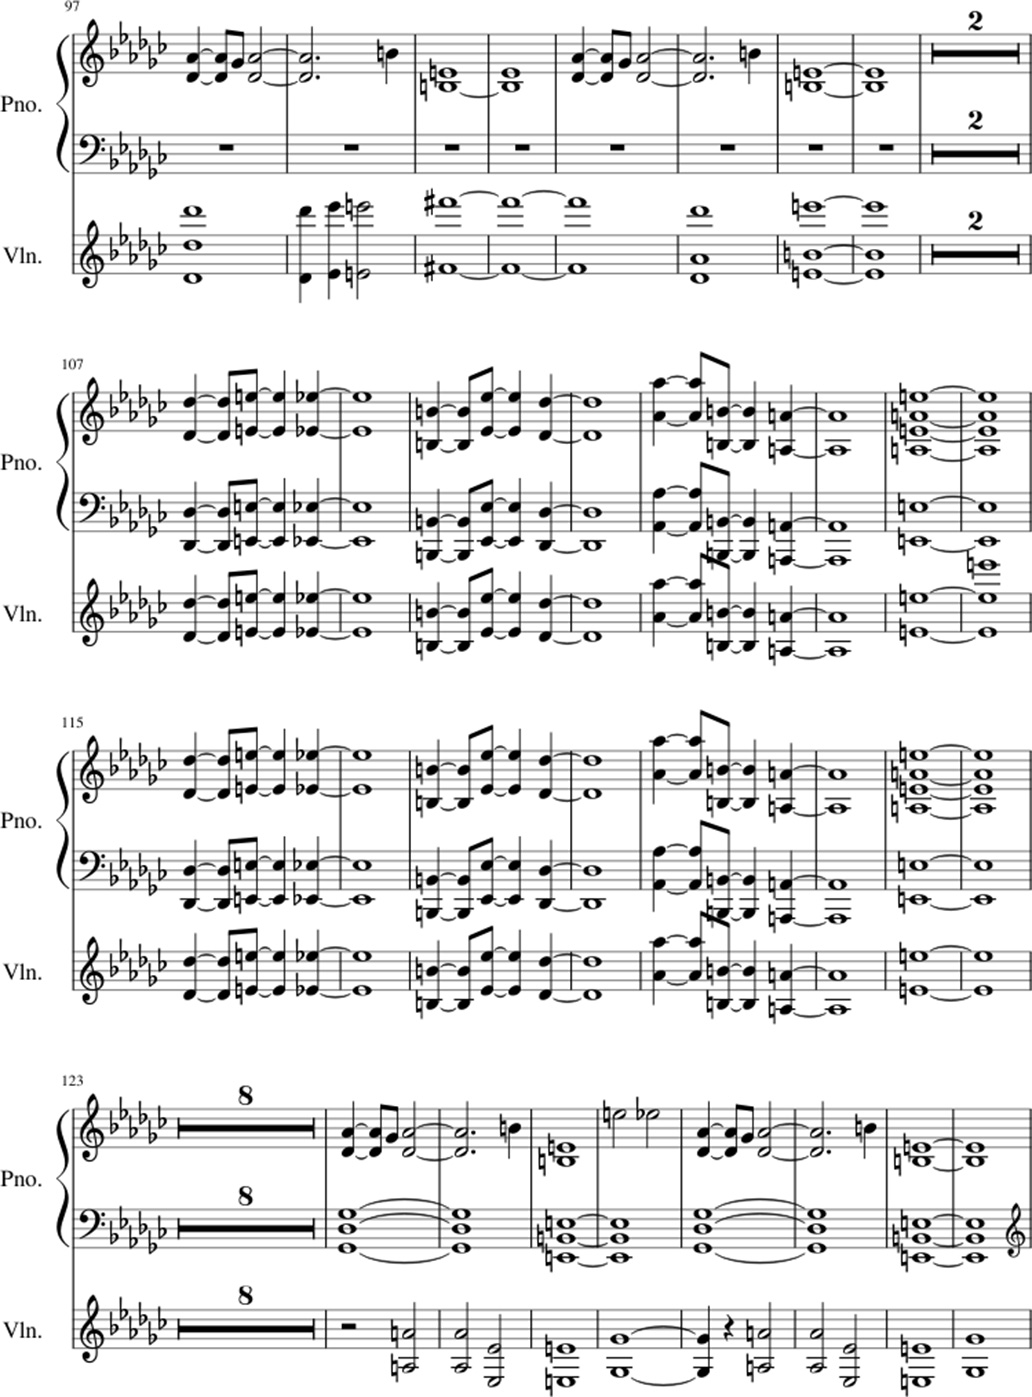 Old Souls sheet music notes 4